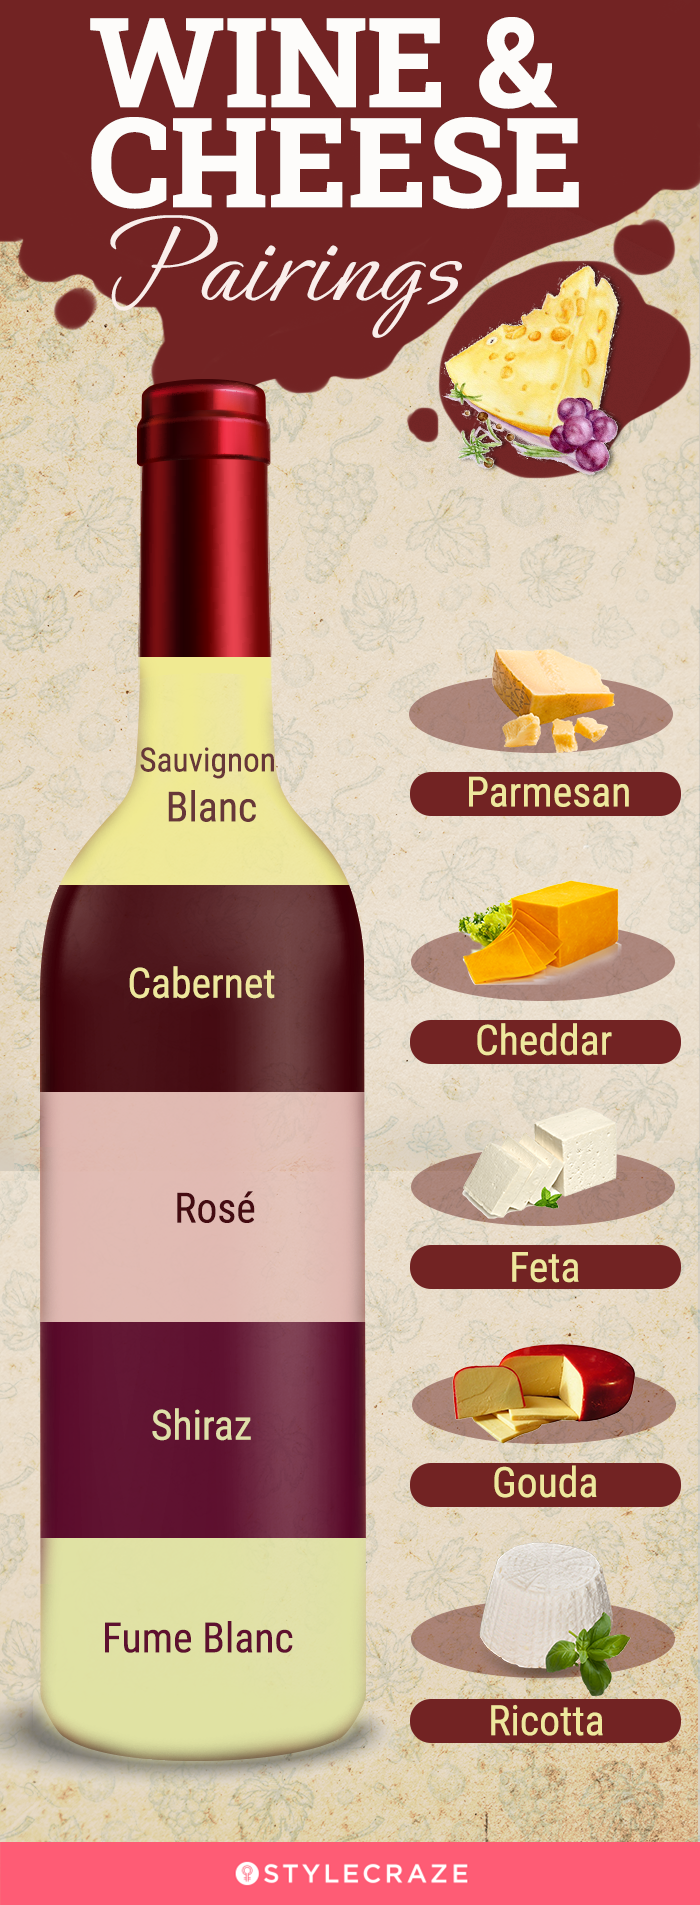 wine and cheese pairings (infographic)